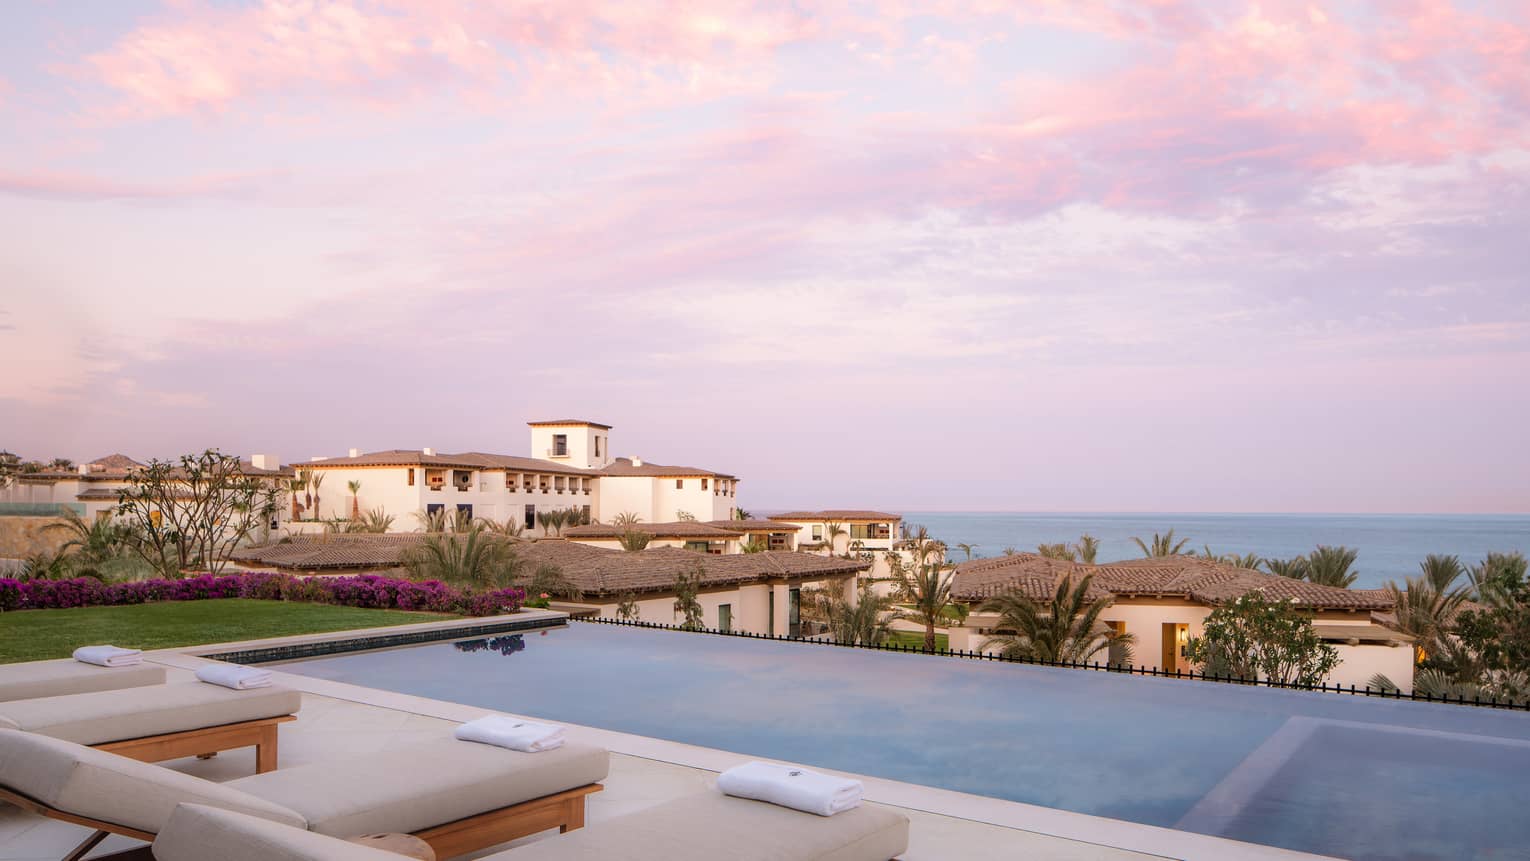 View of the ocean from a private luxury villa terrace, complete with a pool and lounge chairs, at Four Seasons Resort Cabo San Lucas